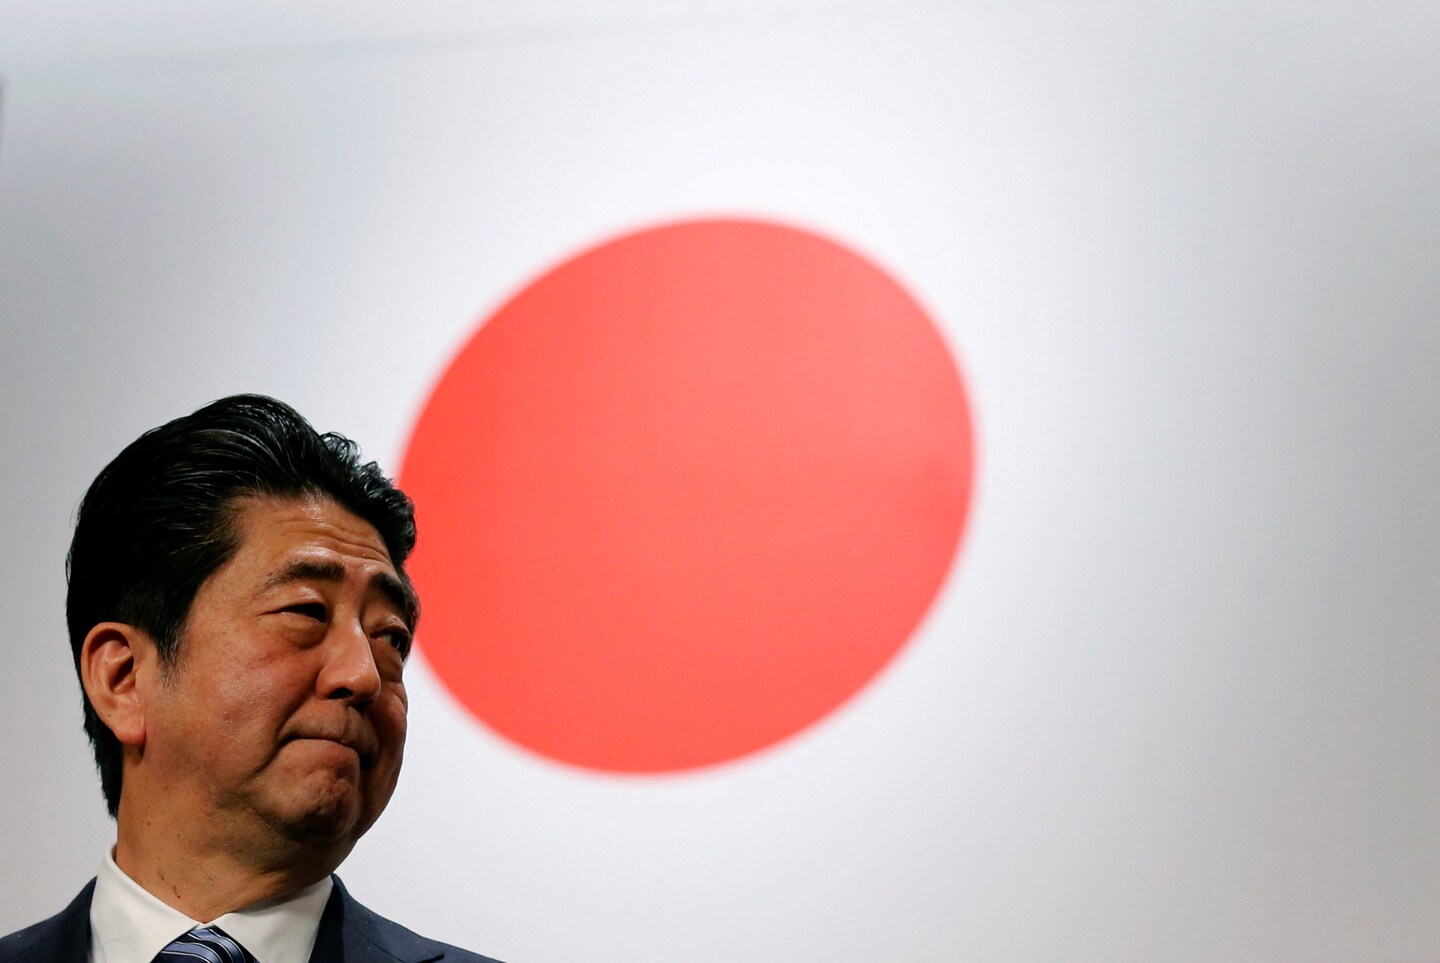 Who was Shinzo Abe, the former Japanese prime minister who was shot